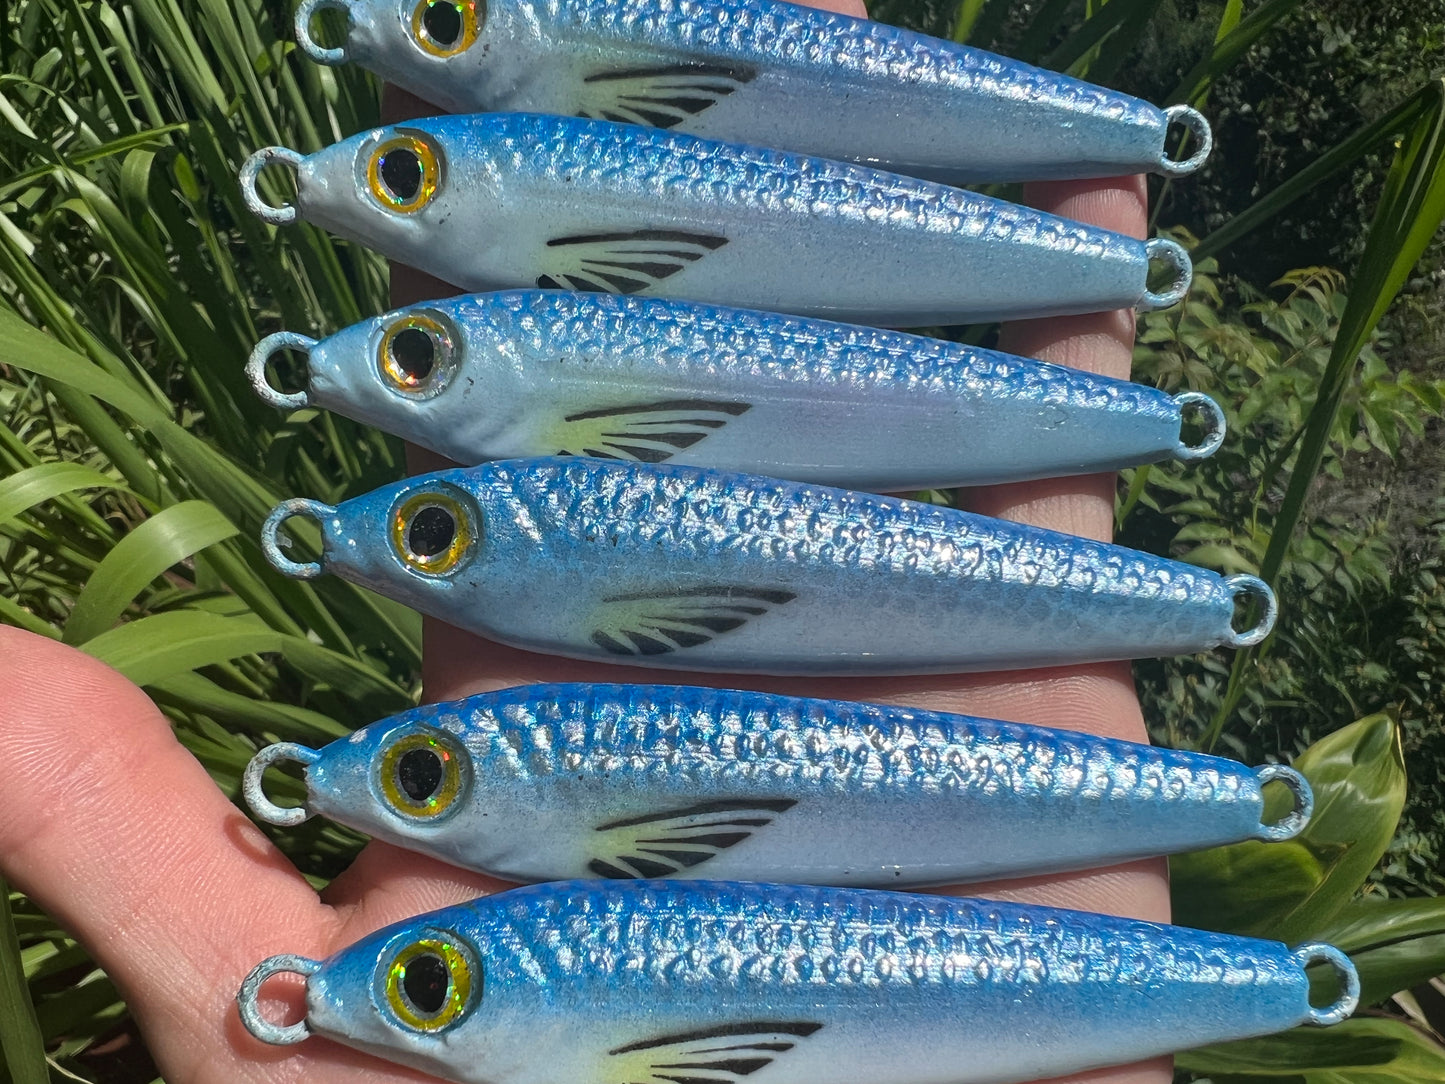 4oz Silver Scale Jig. Comes with Assist Hooks and hardware.